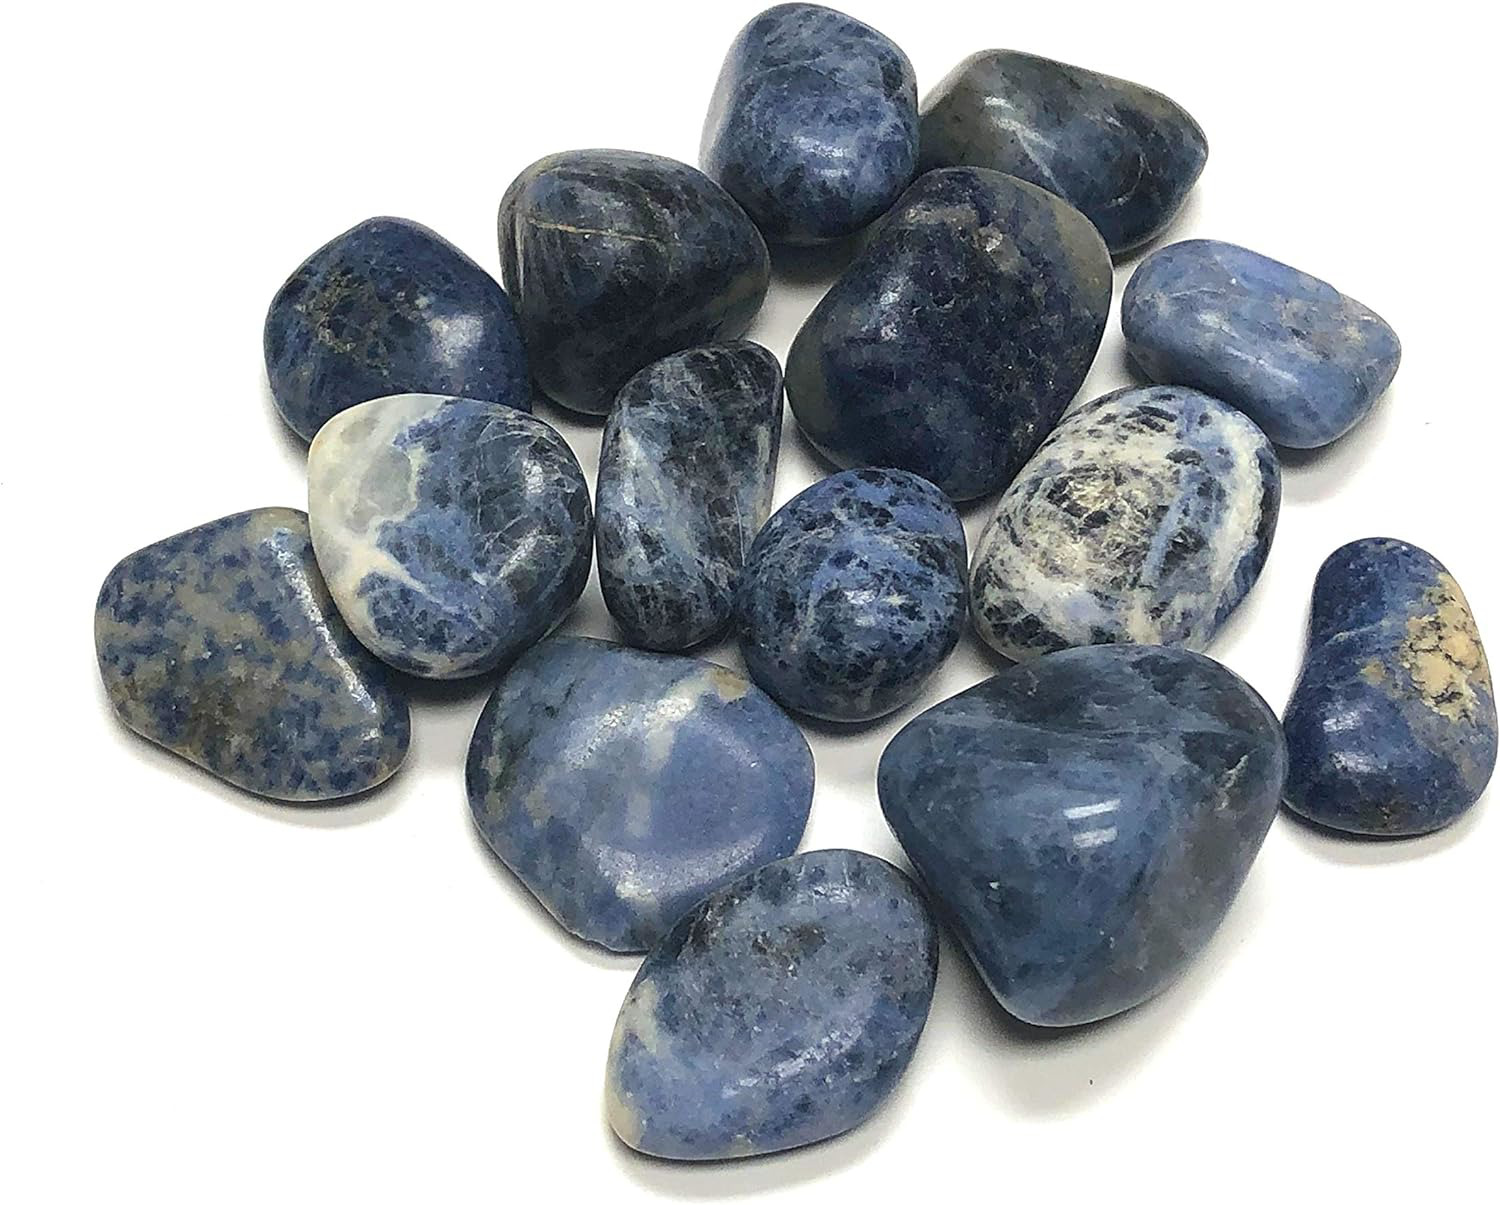 Zentron Crystal Collection Tumbled Sodalite - 1 Piece